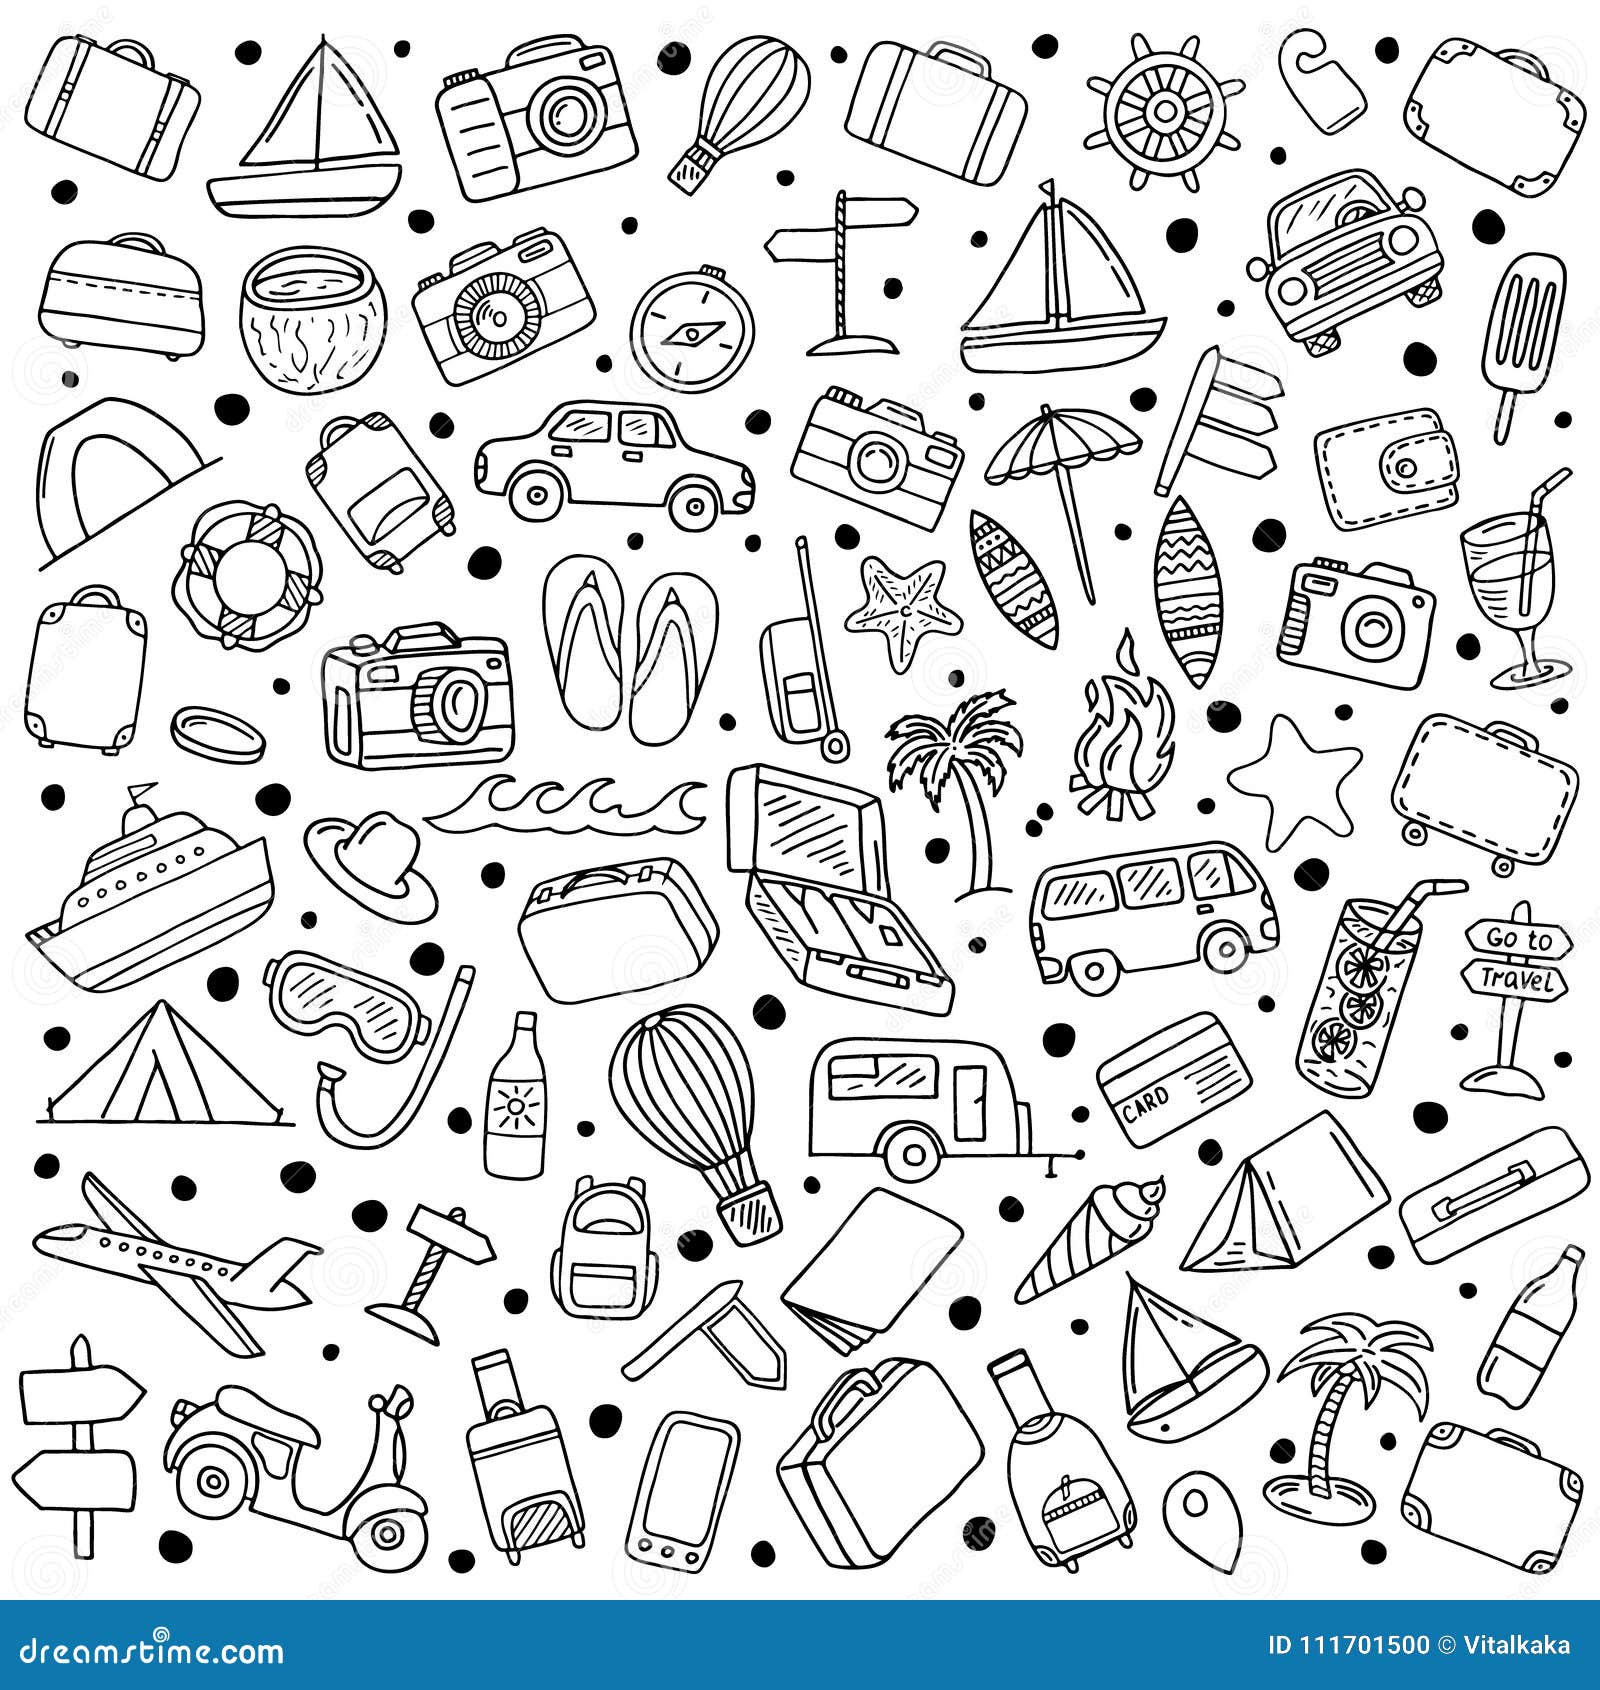 Set of Hand Drawn Travel Doodle Stock Vector - Illustration of element ...